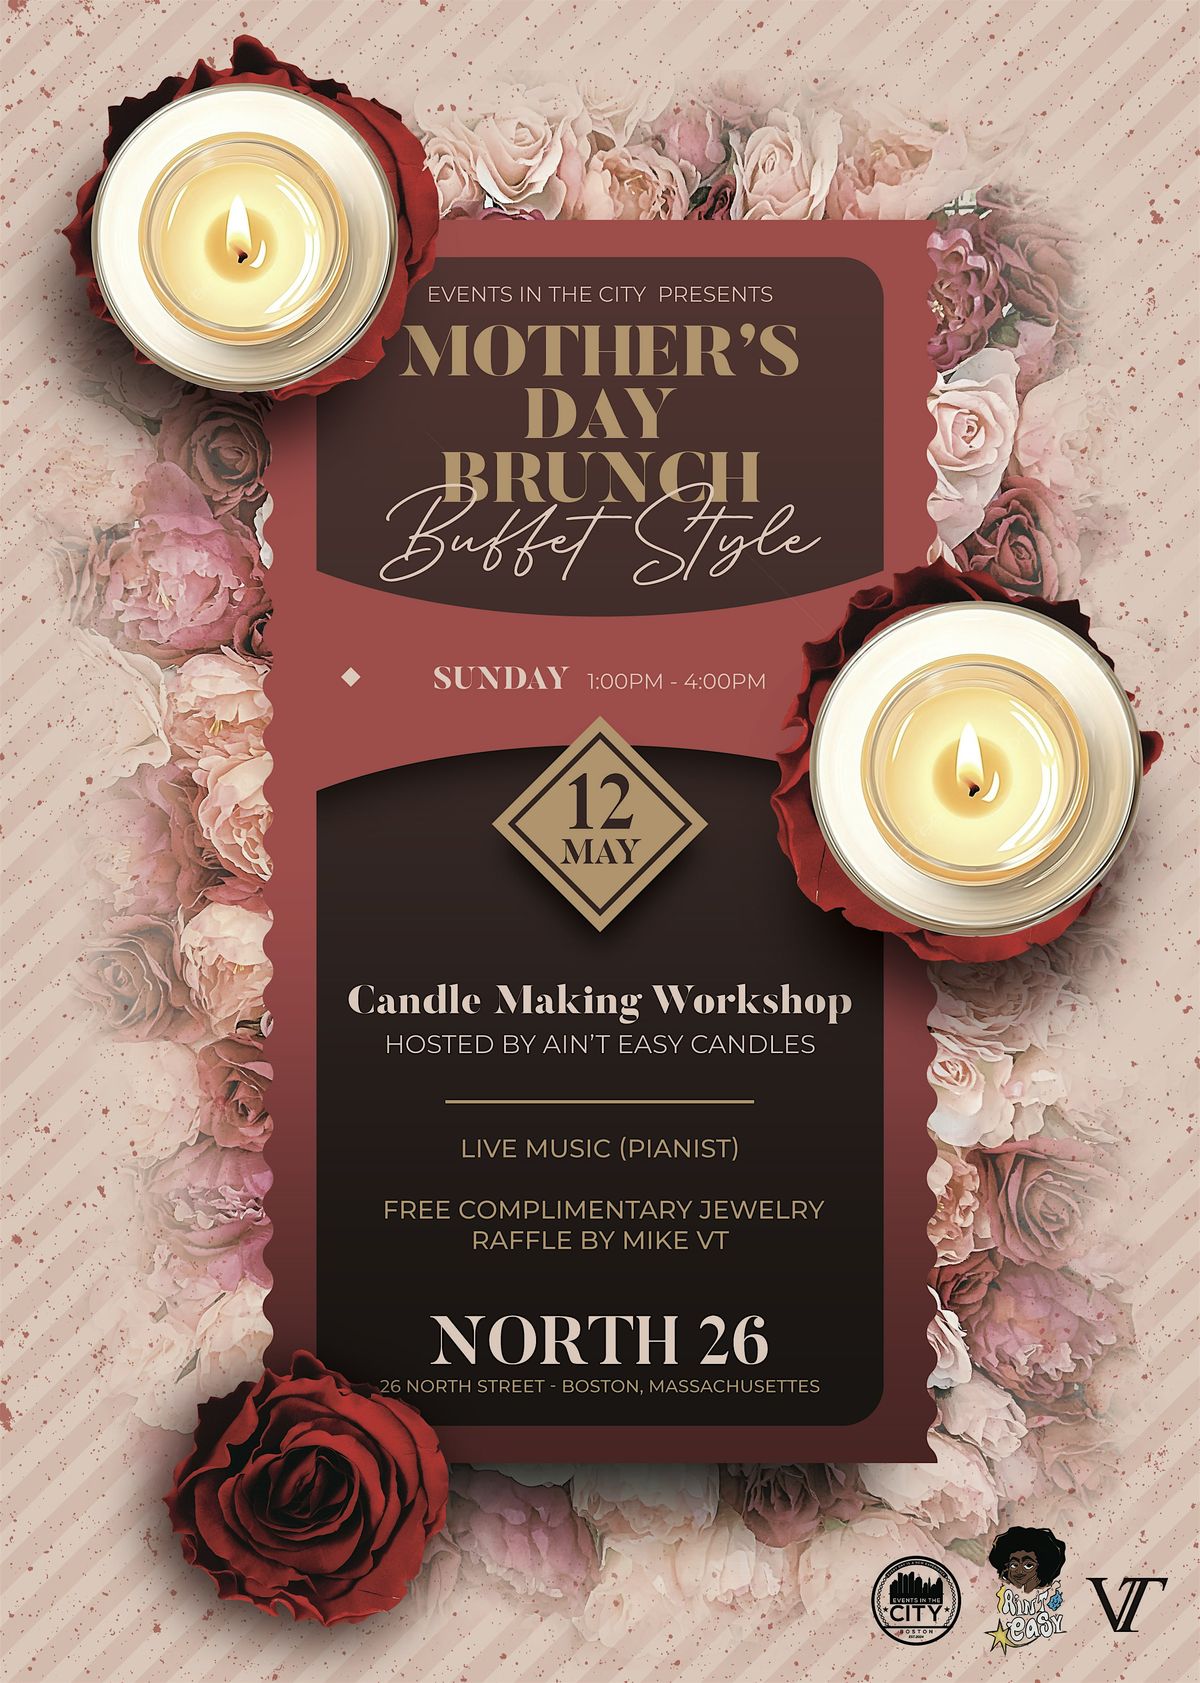 Mothers Day Brunch(Buffet Style) \/ Candle Workshop